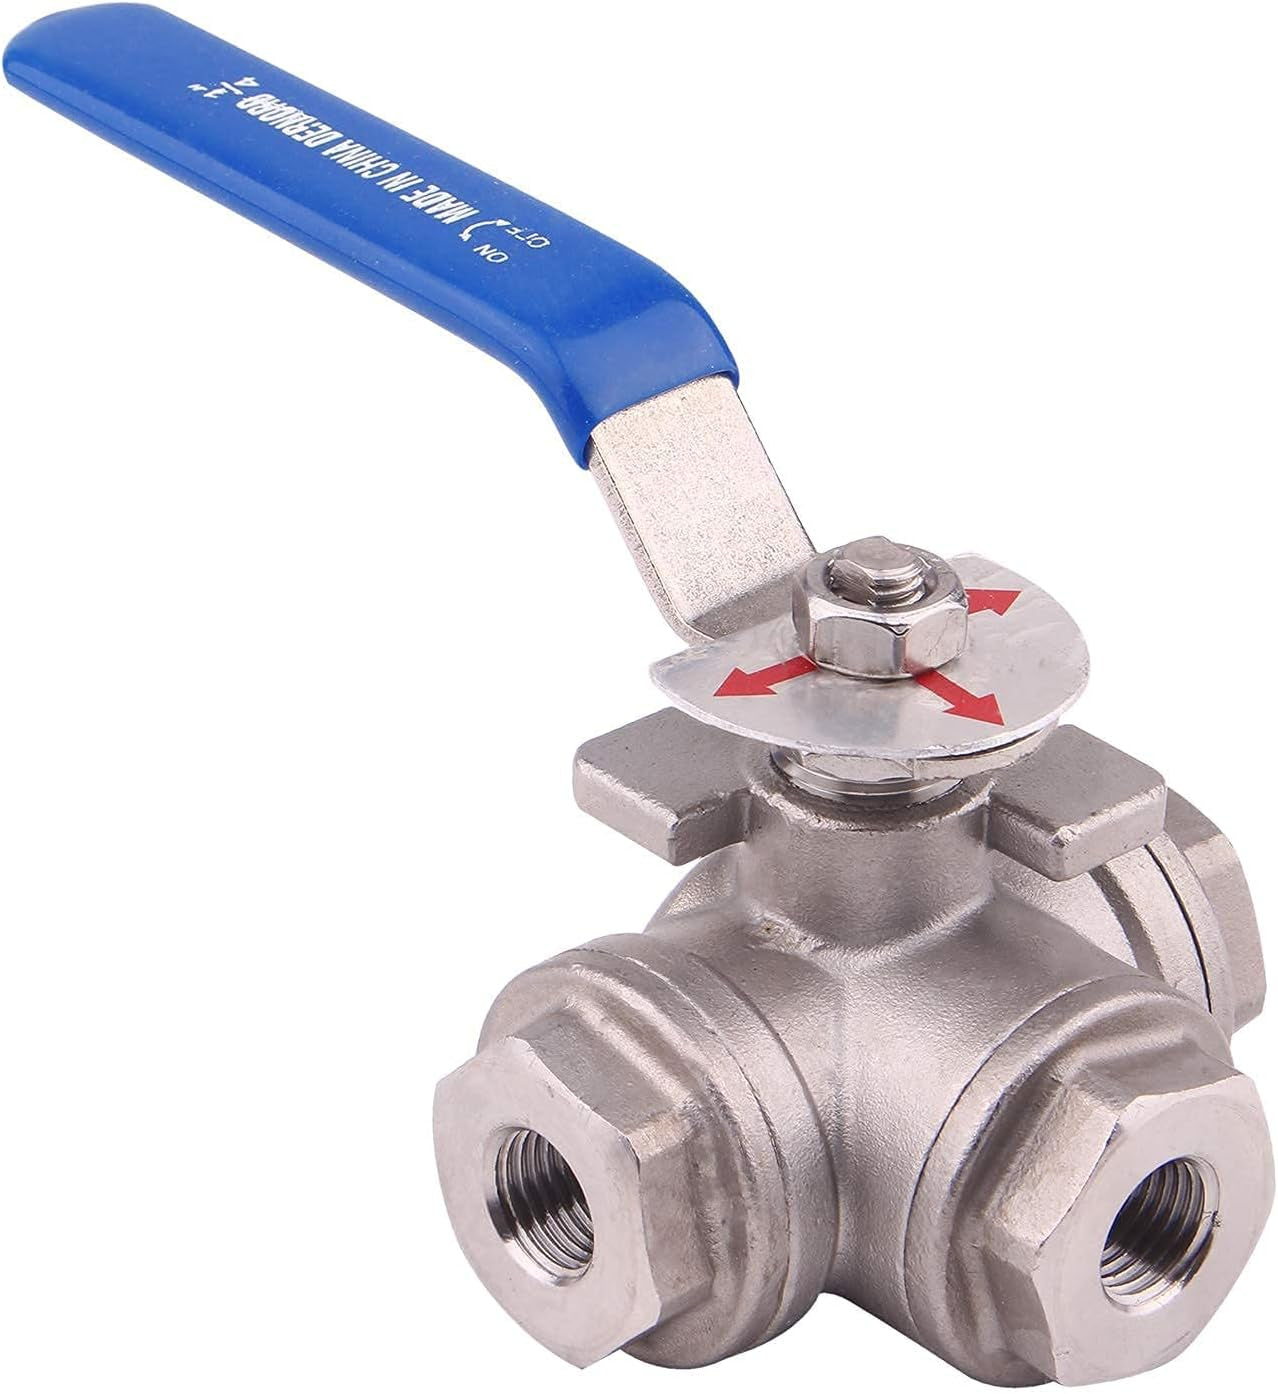 3-Way Ball Valve, T Mounting Pad, Stainless Steel 304 Female Type for Water, Oil, and Gas with Vinyl Locking Handle (1/4 Inch NPT)